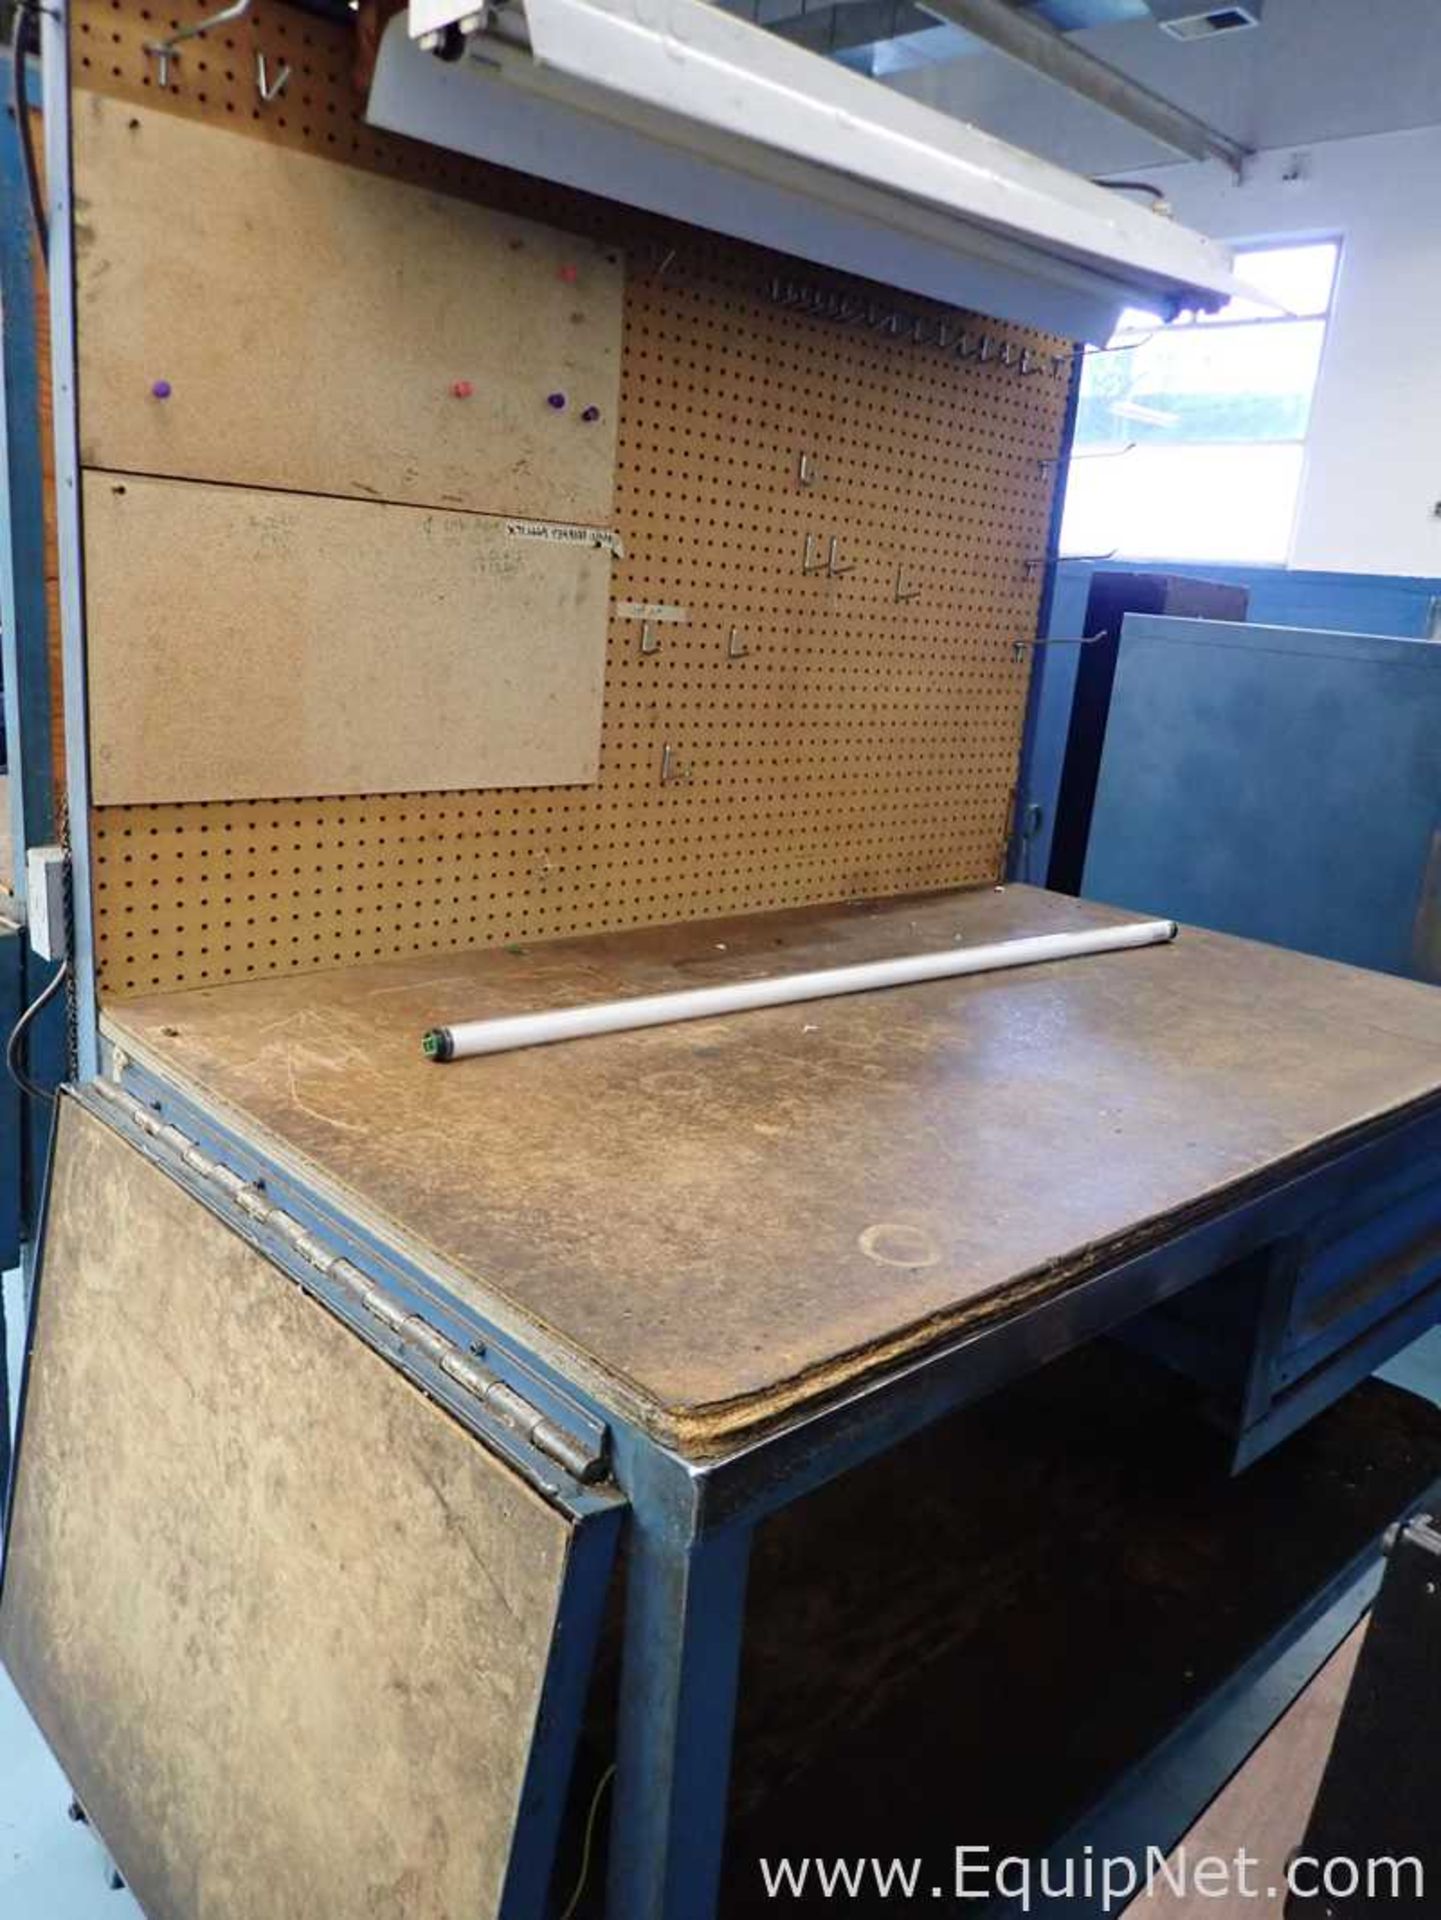 Lot of 2 Machine Shop Work Benches - Image 4 of 6